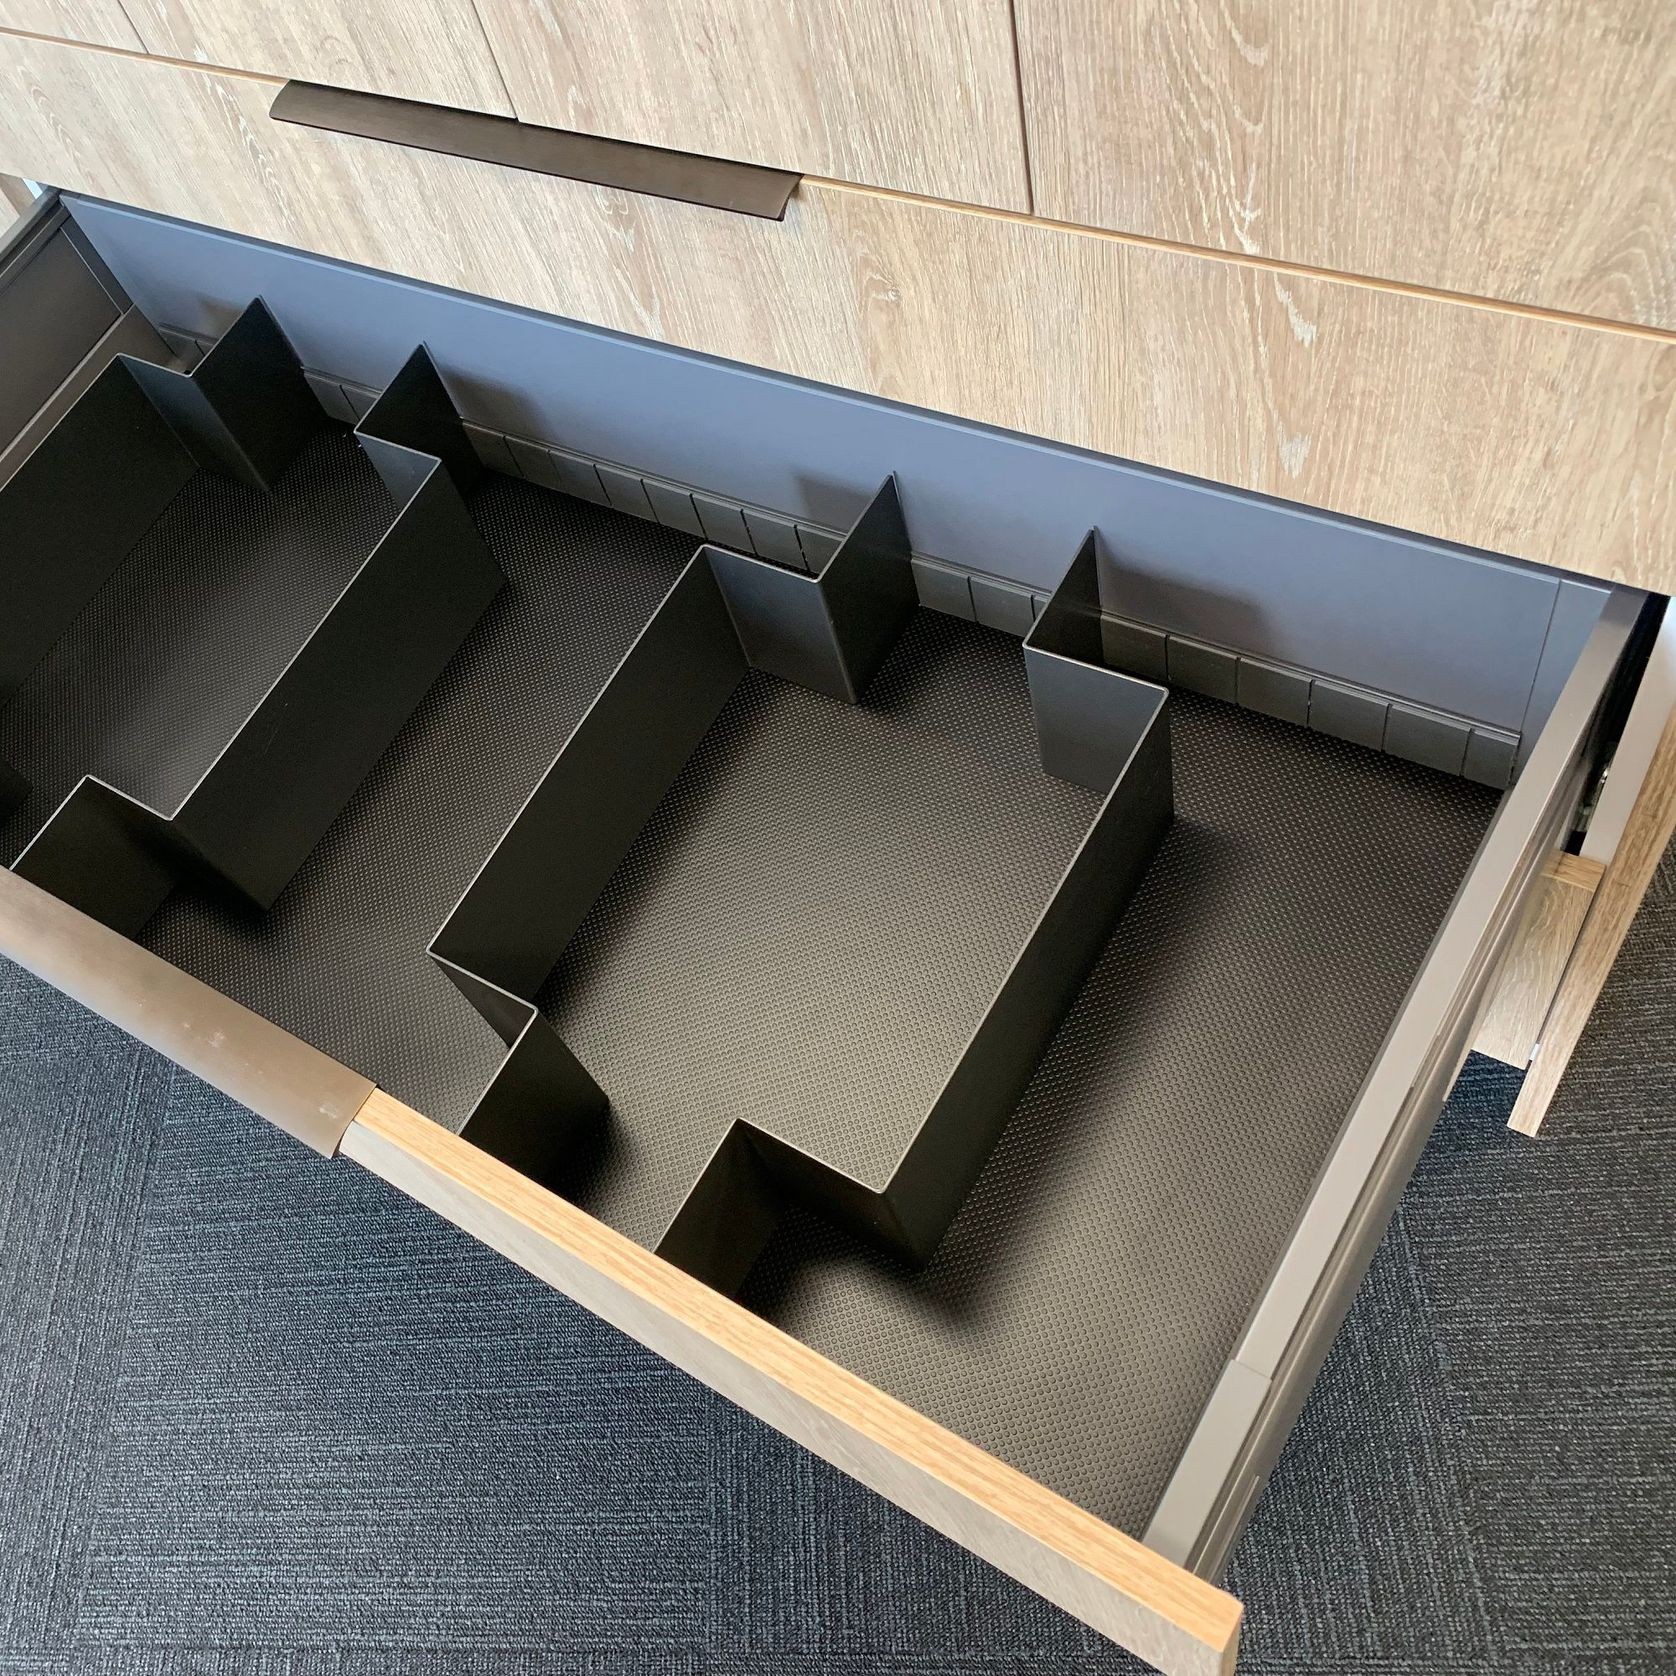 Open Space Drawer Organiser System gallery detail image